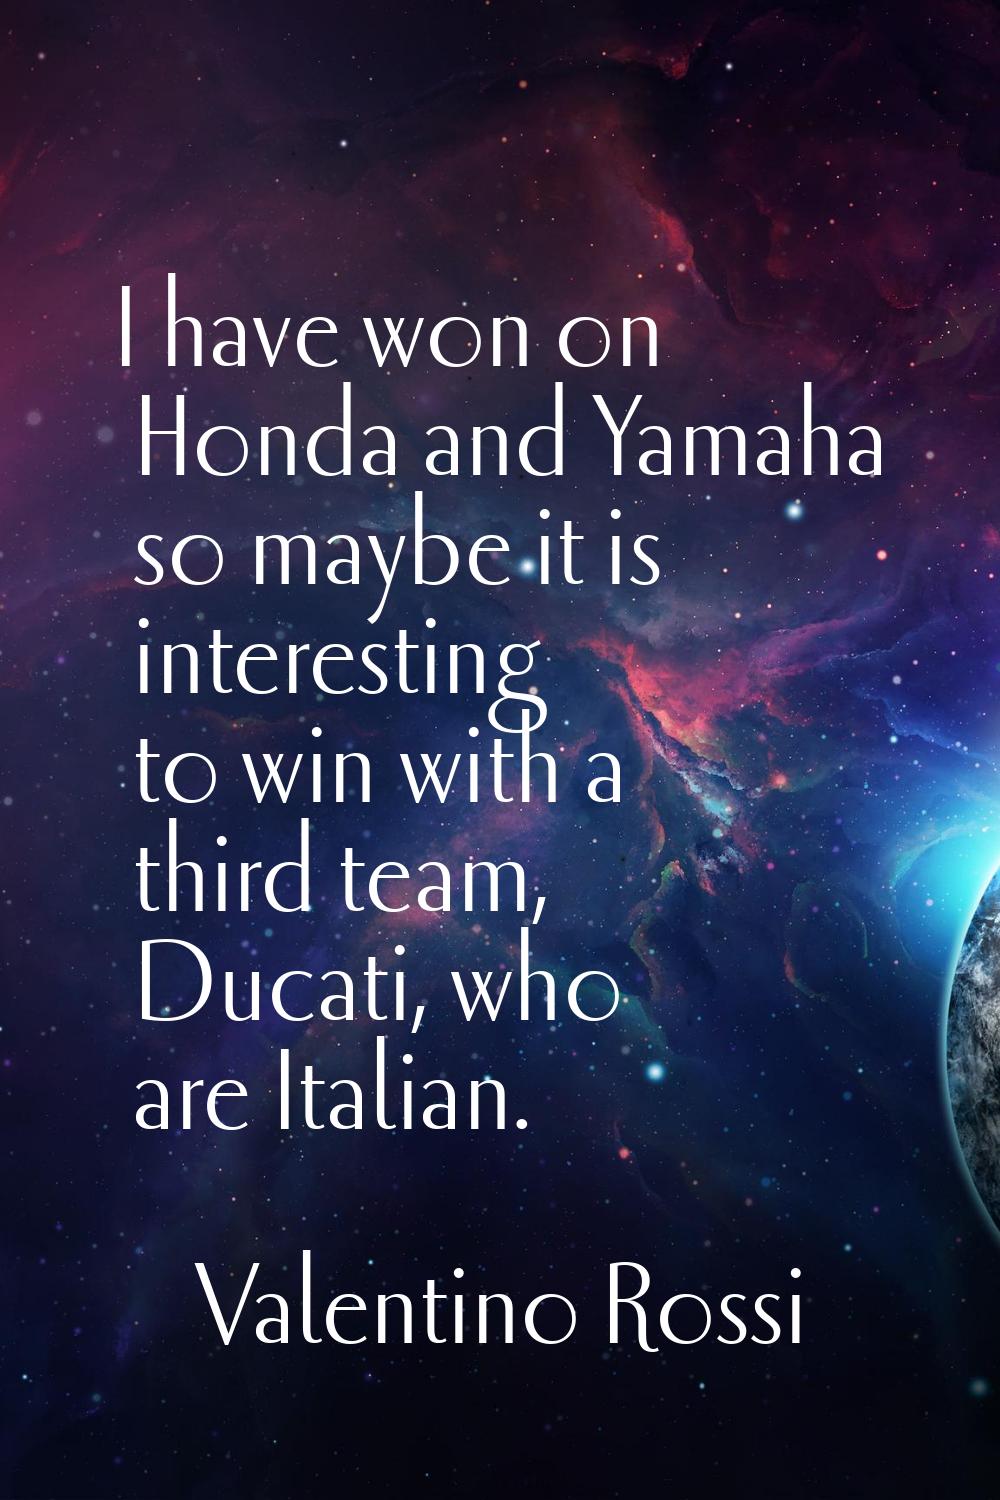 I have won on Honda and Yamaha so maybe it is interesting to win with a third team, Ducati, who are